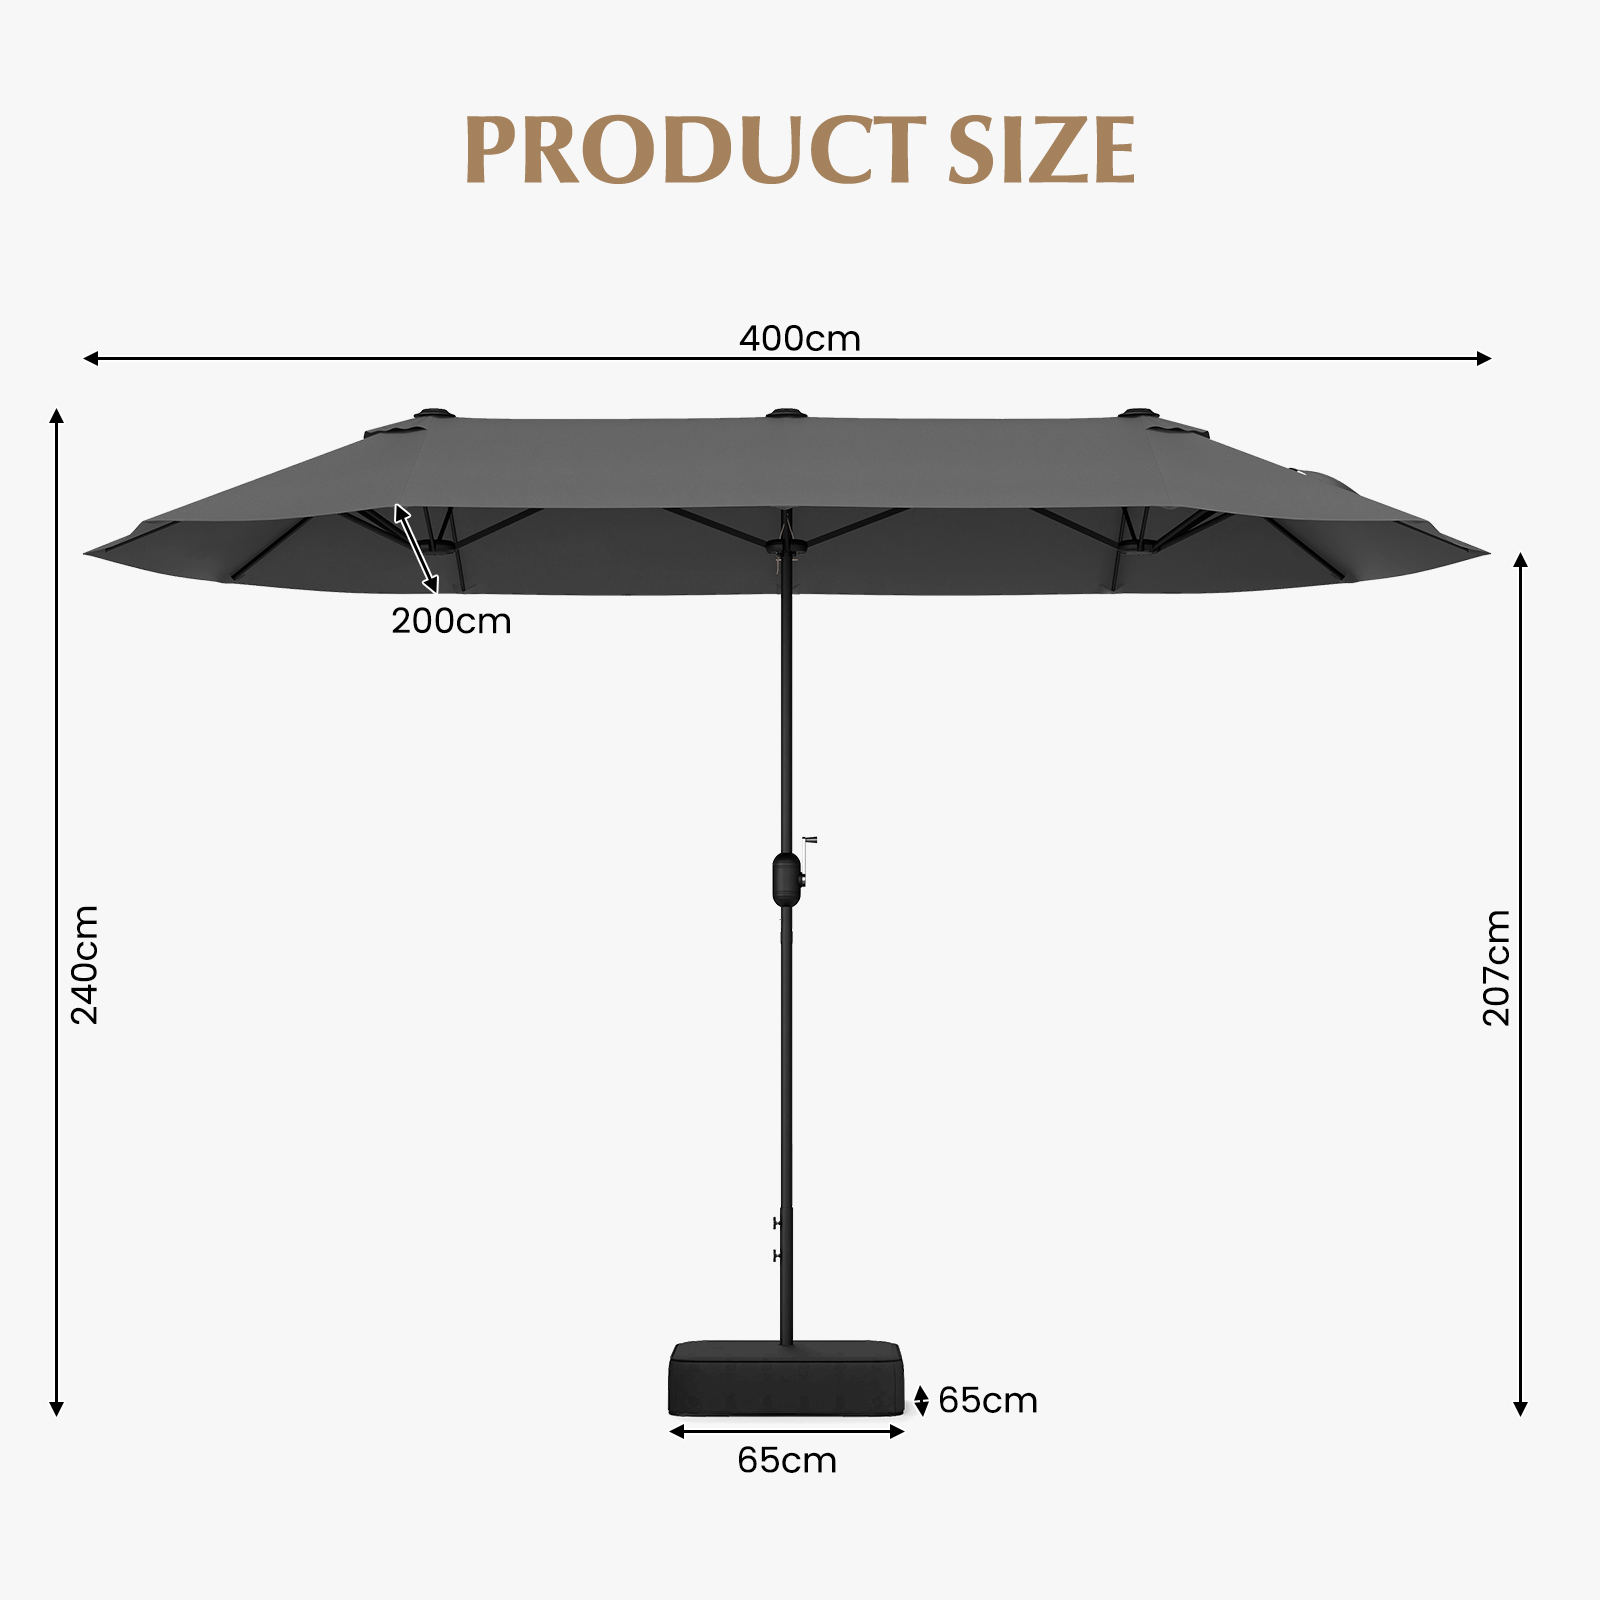 4m_Doublesided_Patio_Umbrella_with_Crank_Handle_hs_size-5.jpg